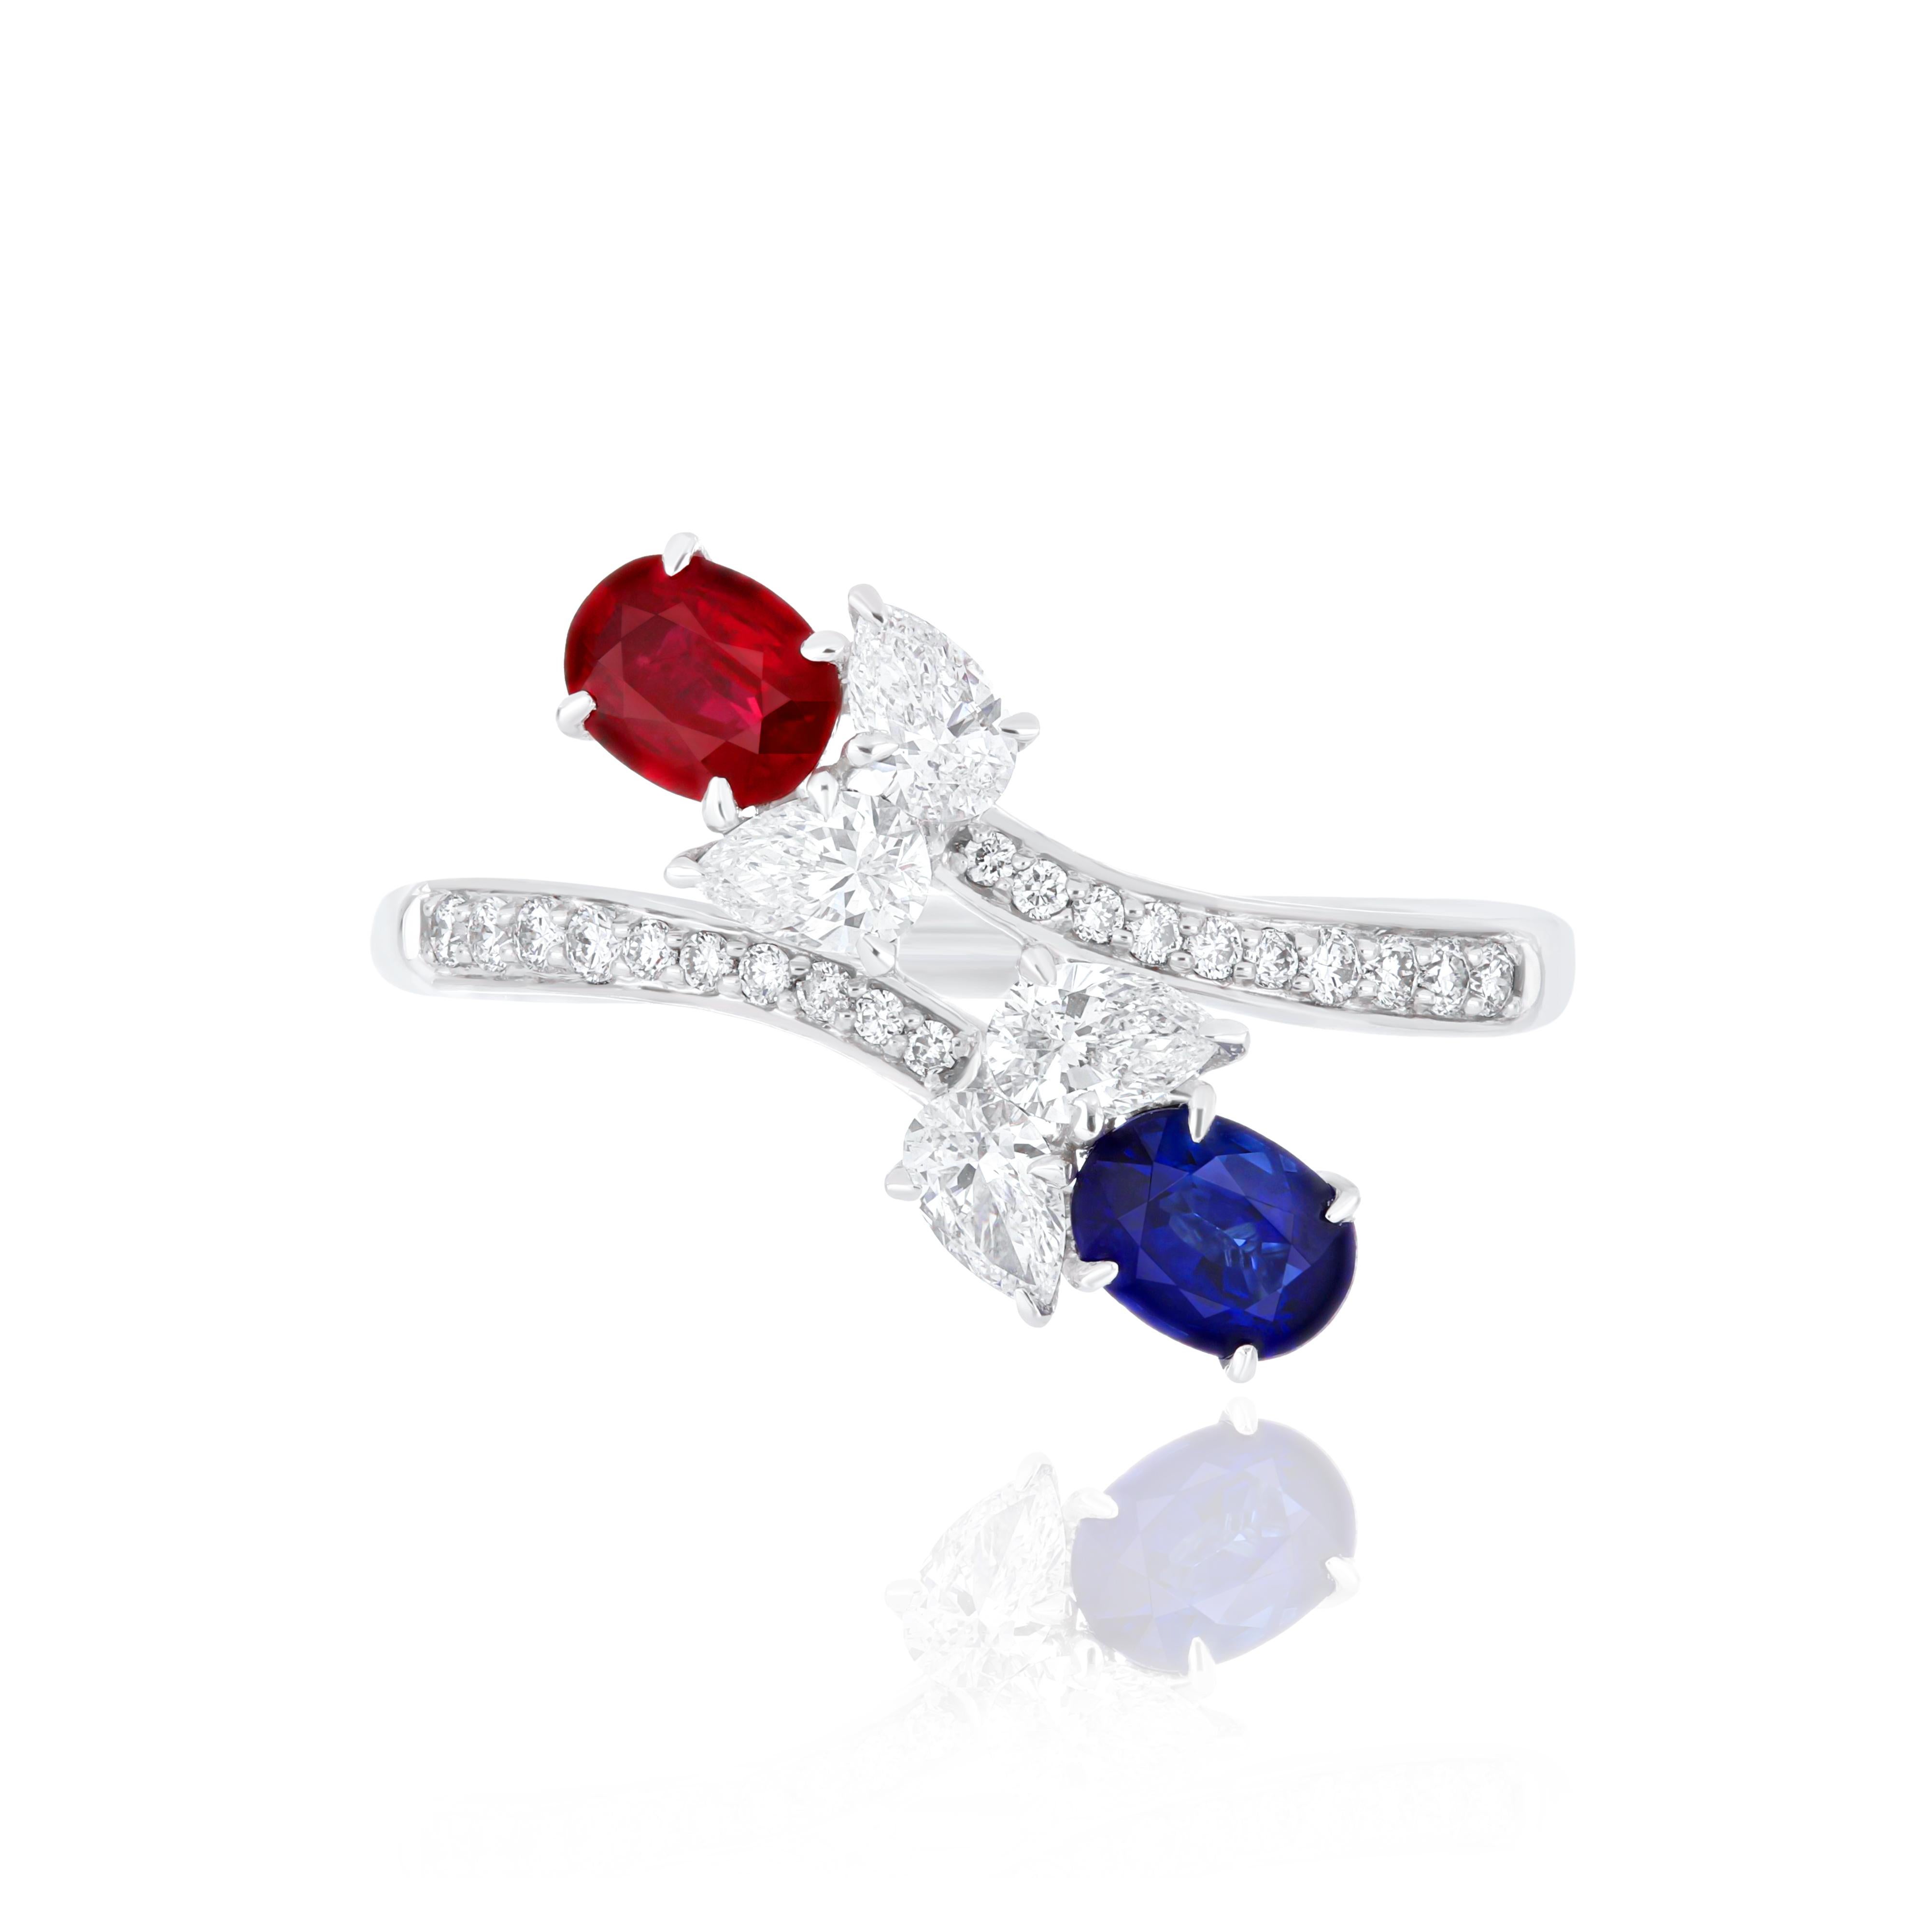 Elegant and exquisitely detailed 18 Karat White Gold Ring, center set with 0.34Cts .Oval Shape Ruby Mozambique, Blue Sapphire With 0.51Cts and micro pave set Diamonds, weighting approx. 0.57Cts Beautifully Hand crafted in 18 Karat White Gold.

Stone